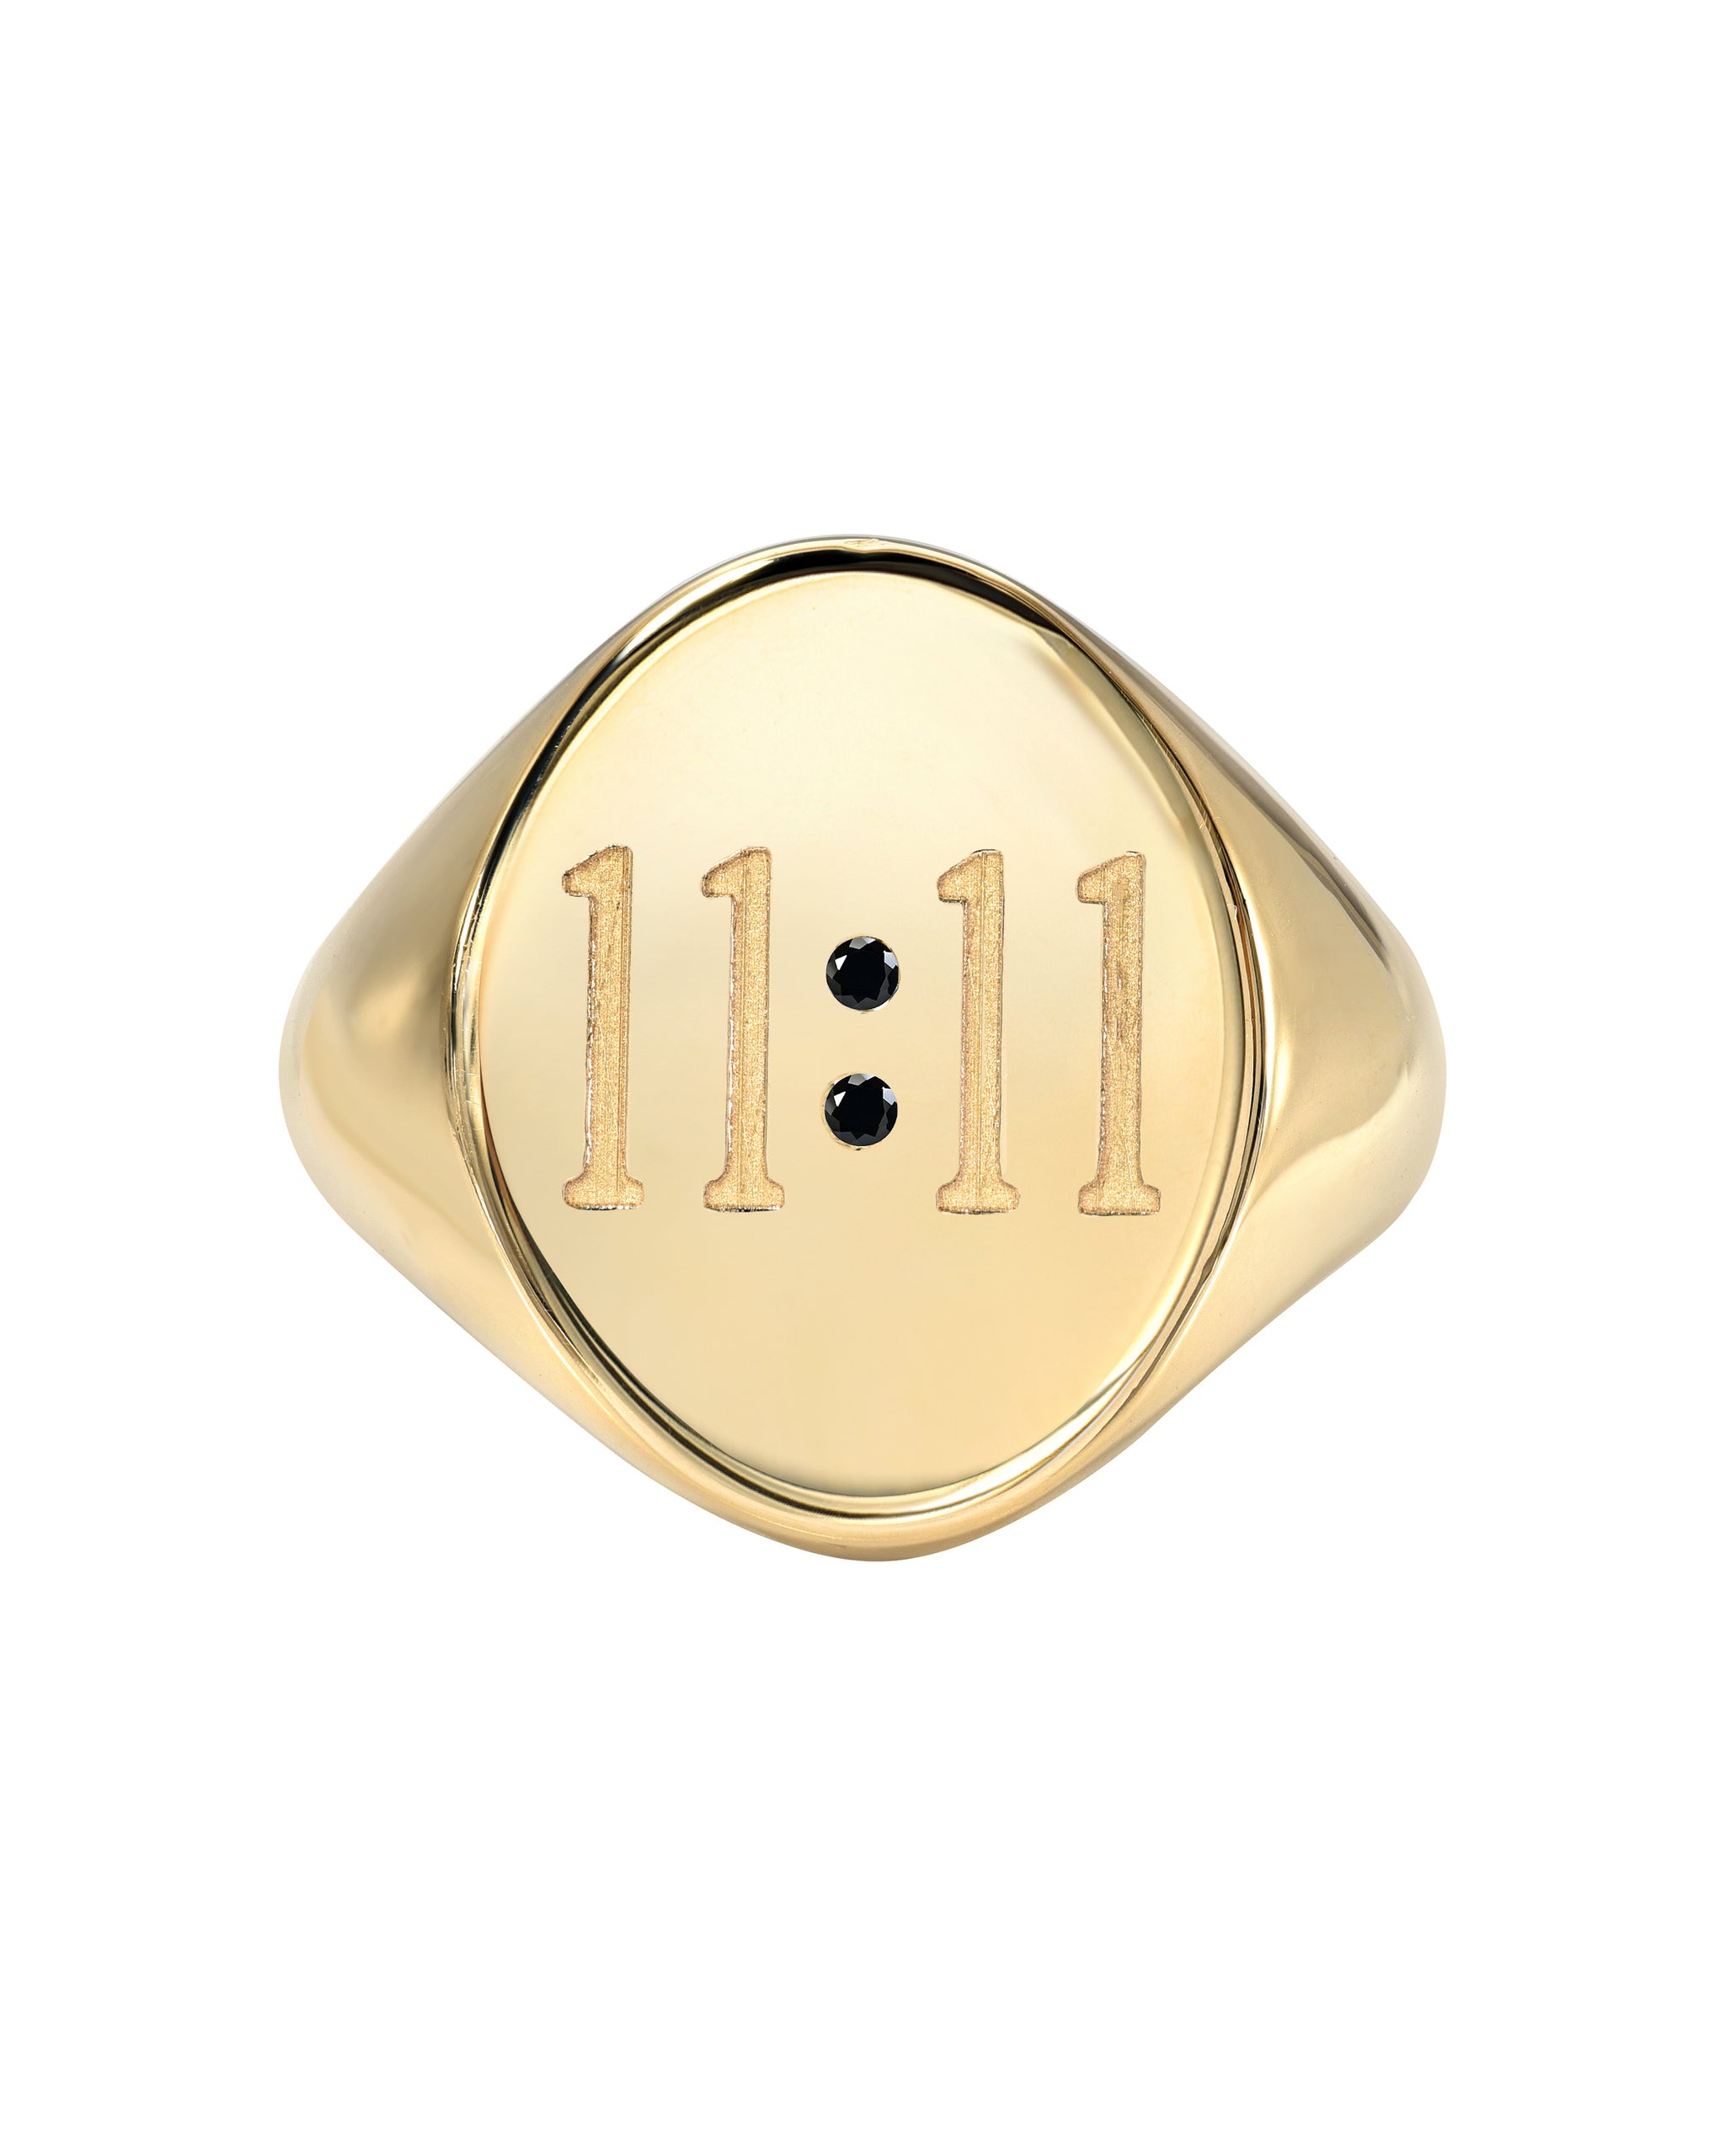 14k Yellow Gold and Onyx 11:11 Signet Ring